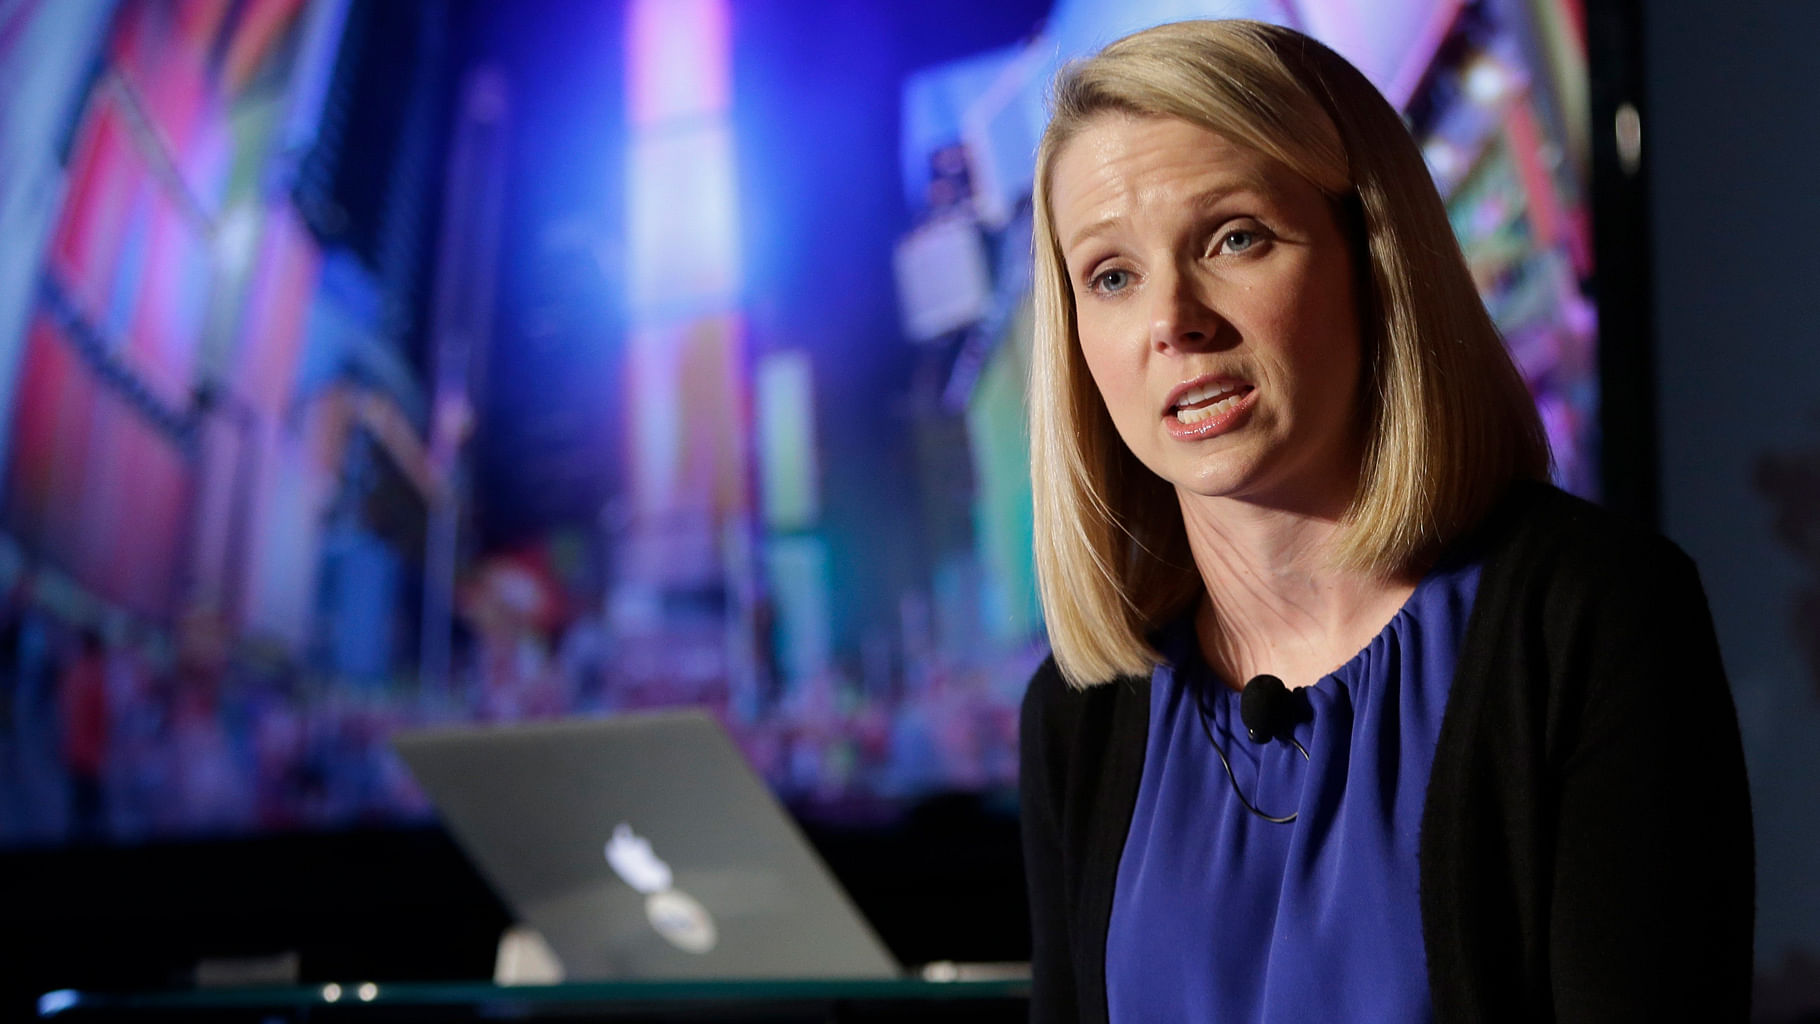 File photo of Yahoo CEO Marissa Mayer speaking during a news conference in New York. (Photo: AP)